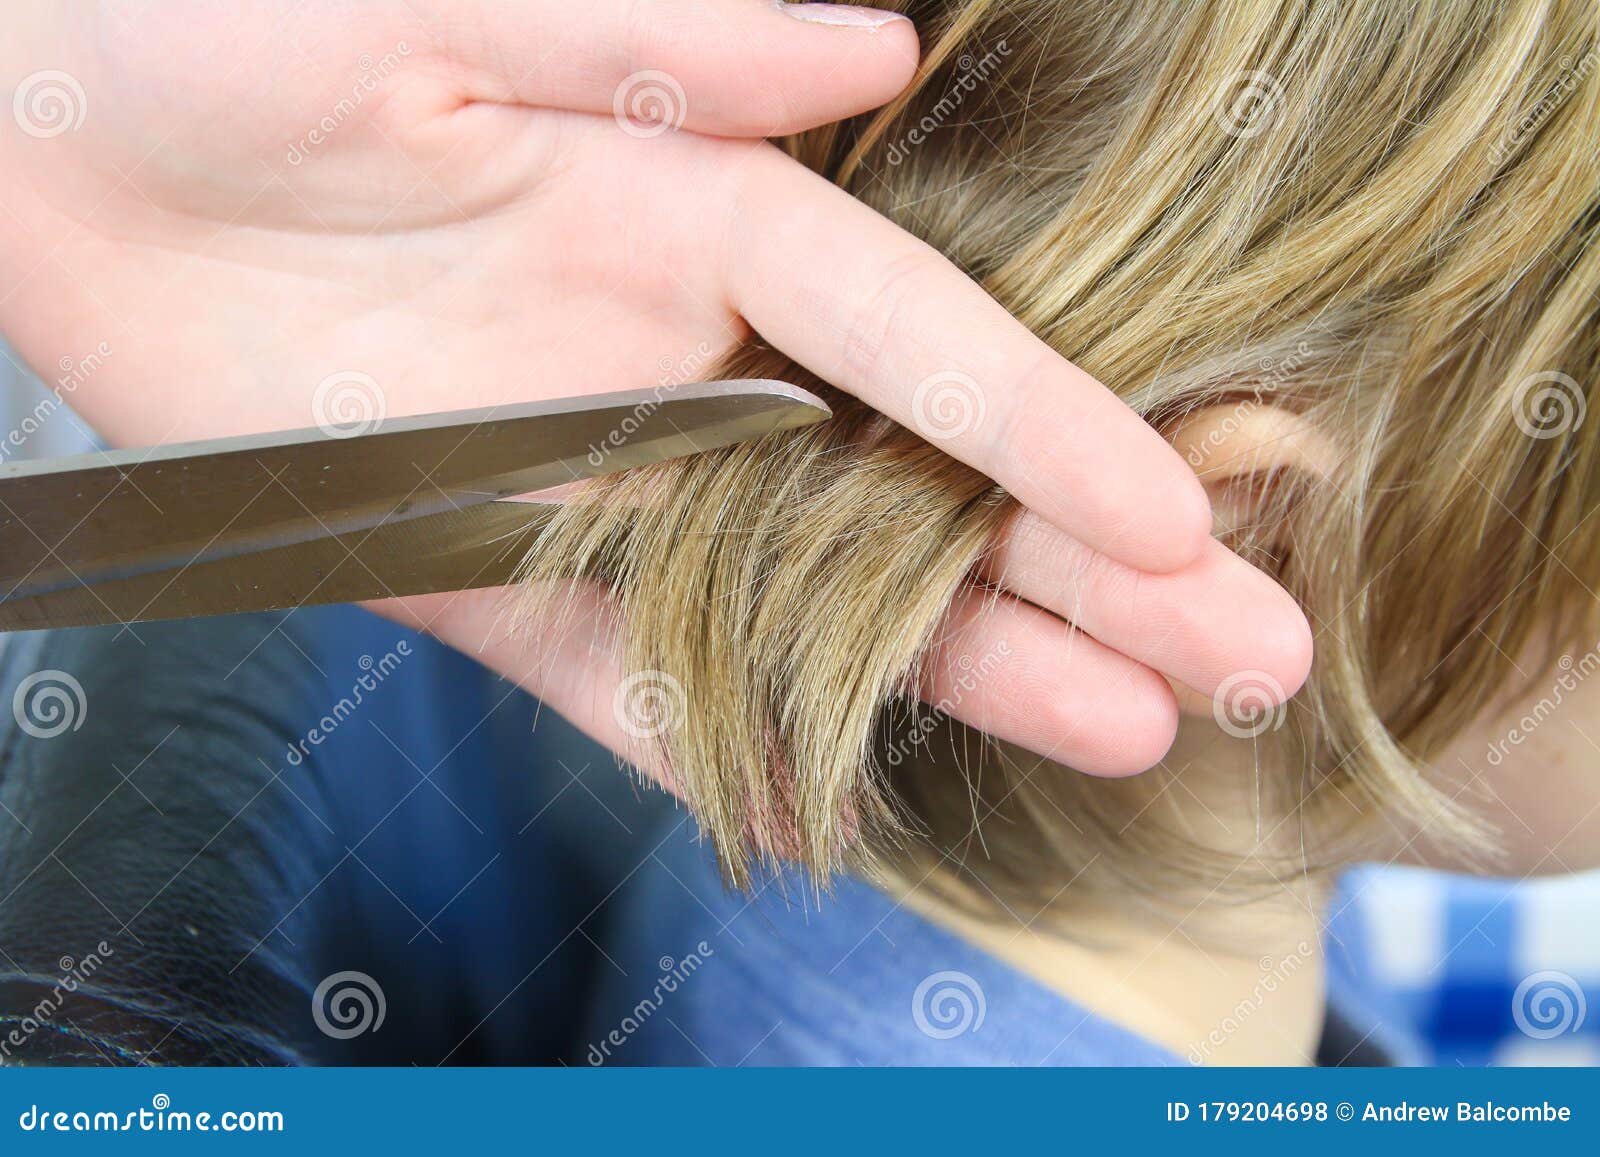 Teenager Having Her Hair Cut at Home Stock Photo - Image of pandemic,  hairstylist: 179204698